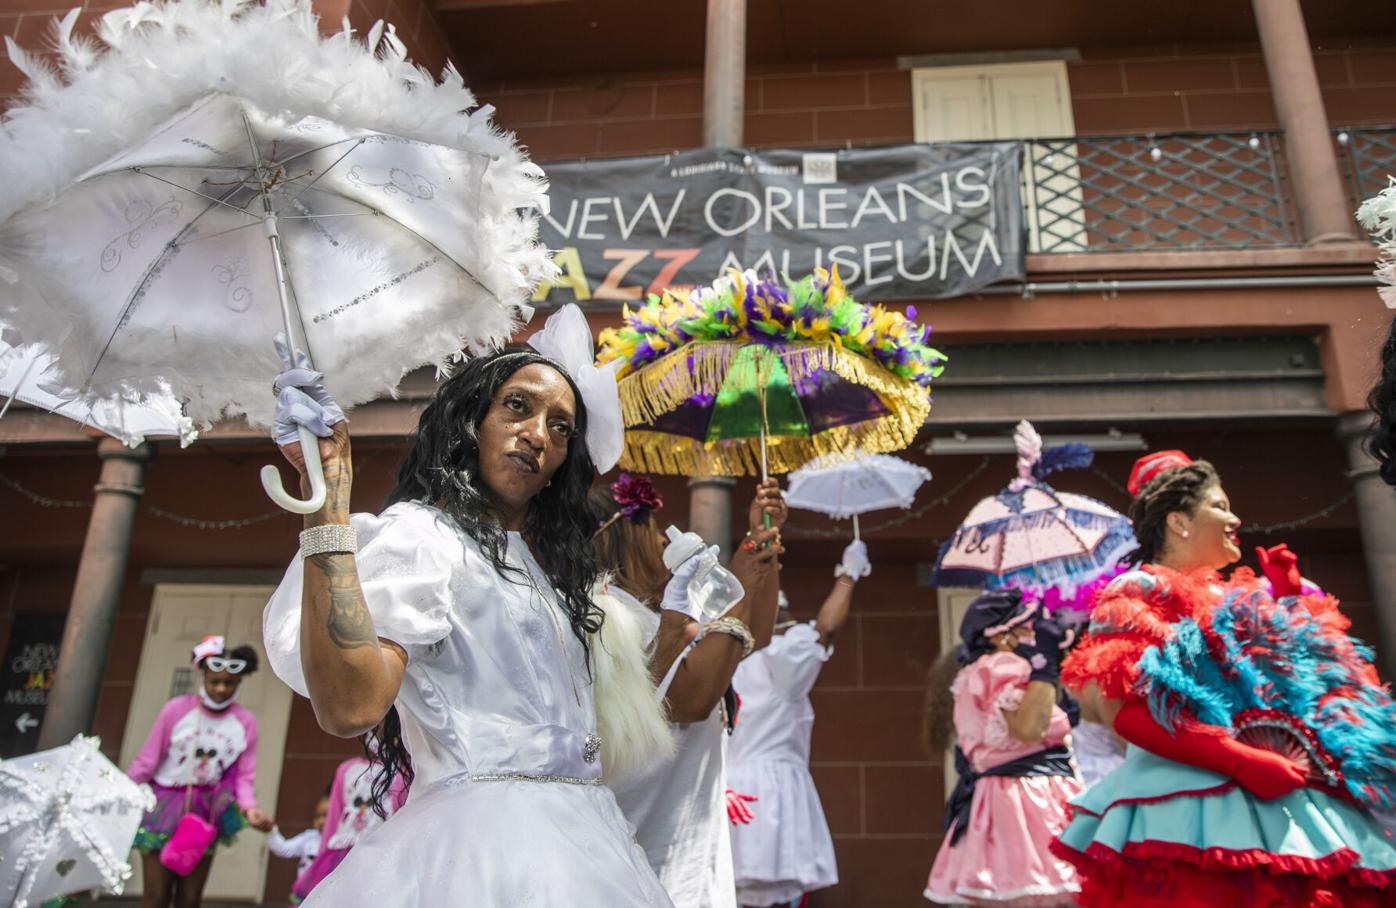 The Baby Dolls of New Orleans: Cultural-preservationist she-roes